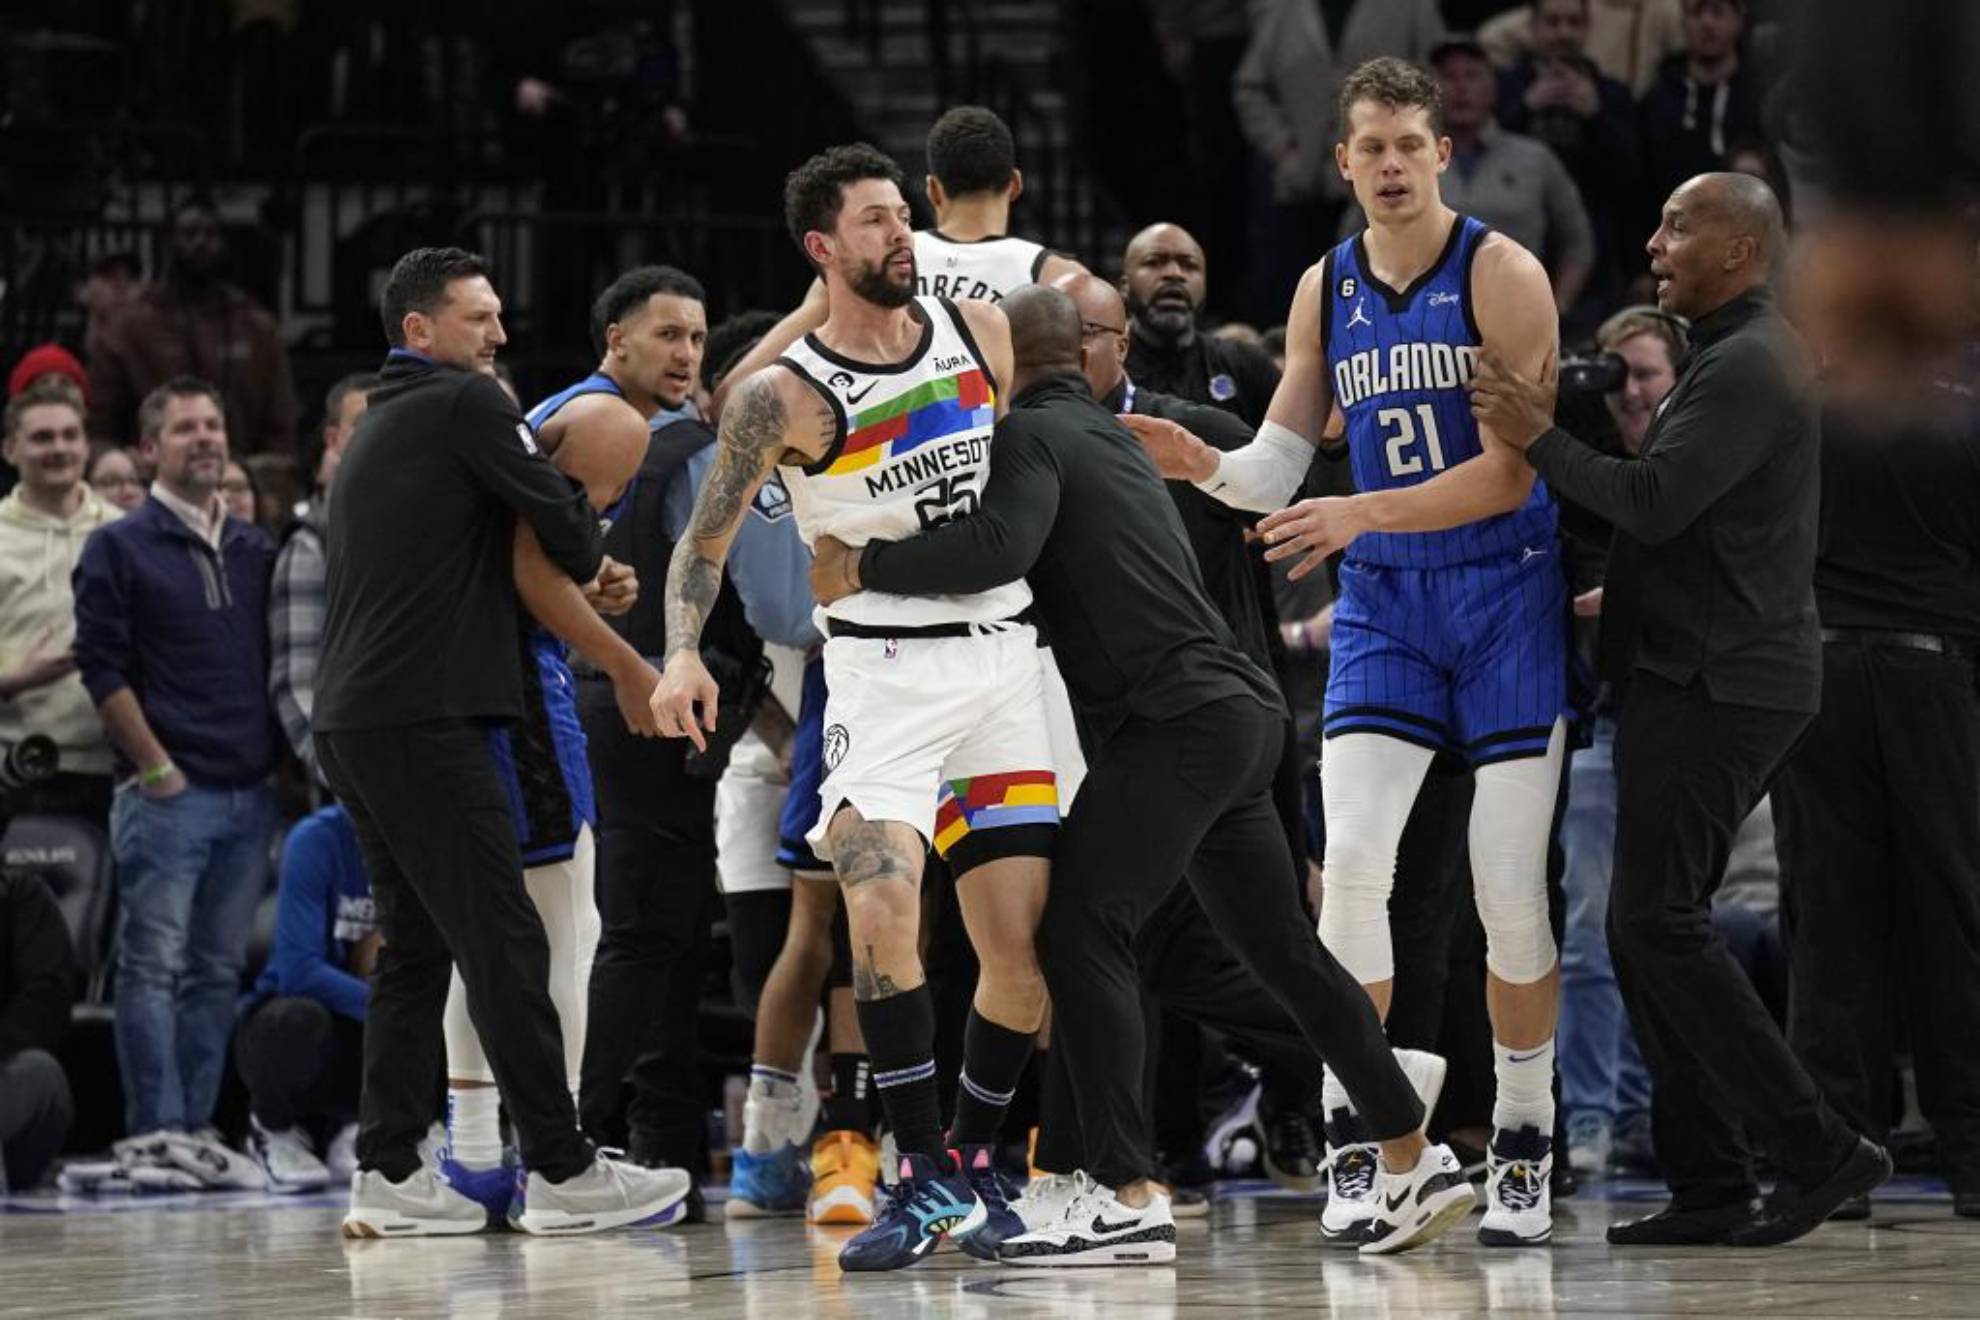 NBA hand down big suspensions to Bamba and Rivers after mass brawl